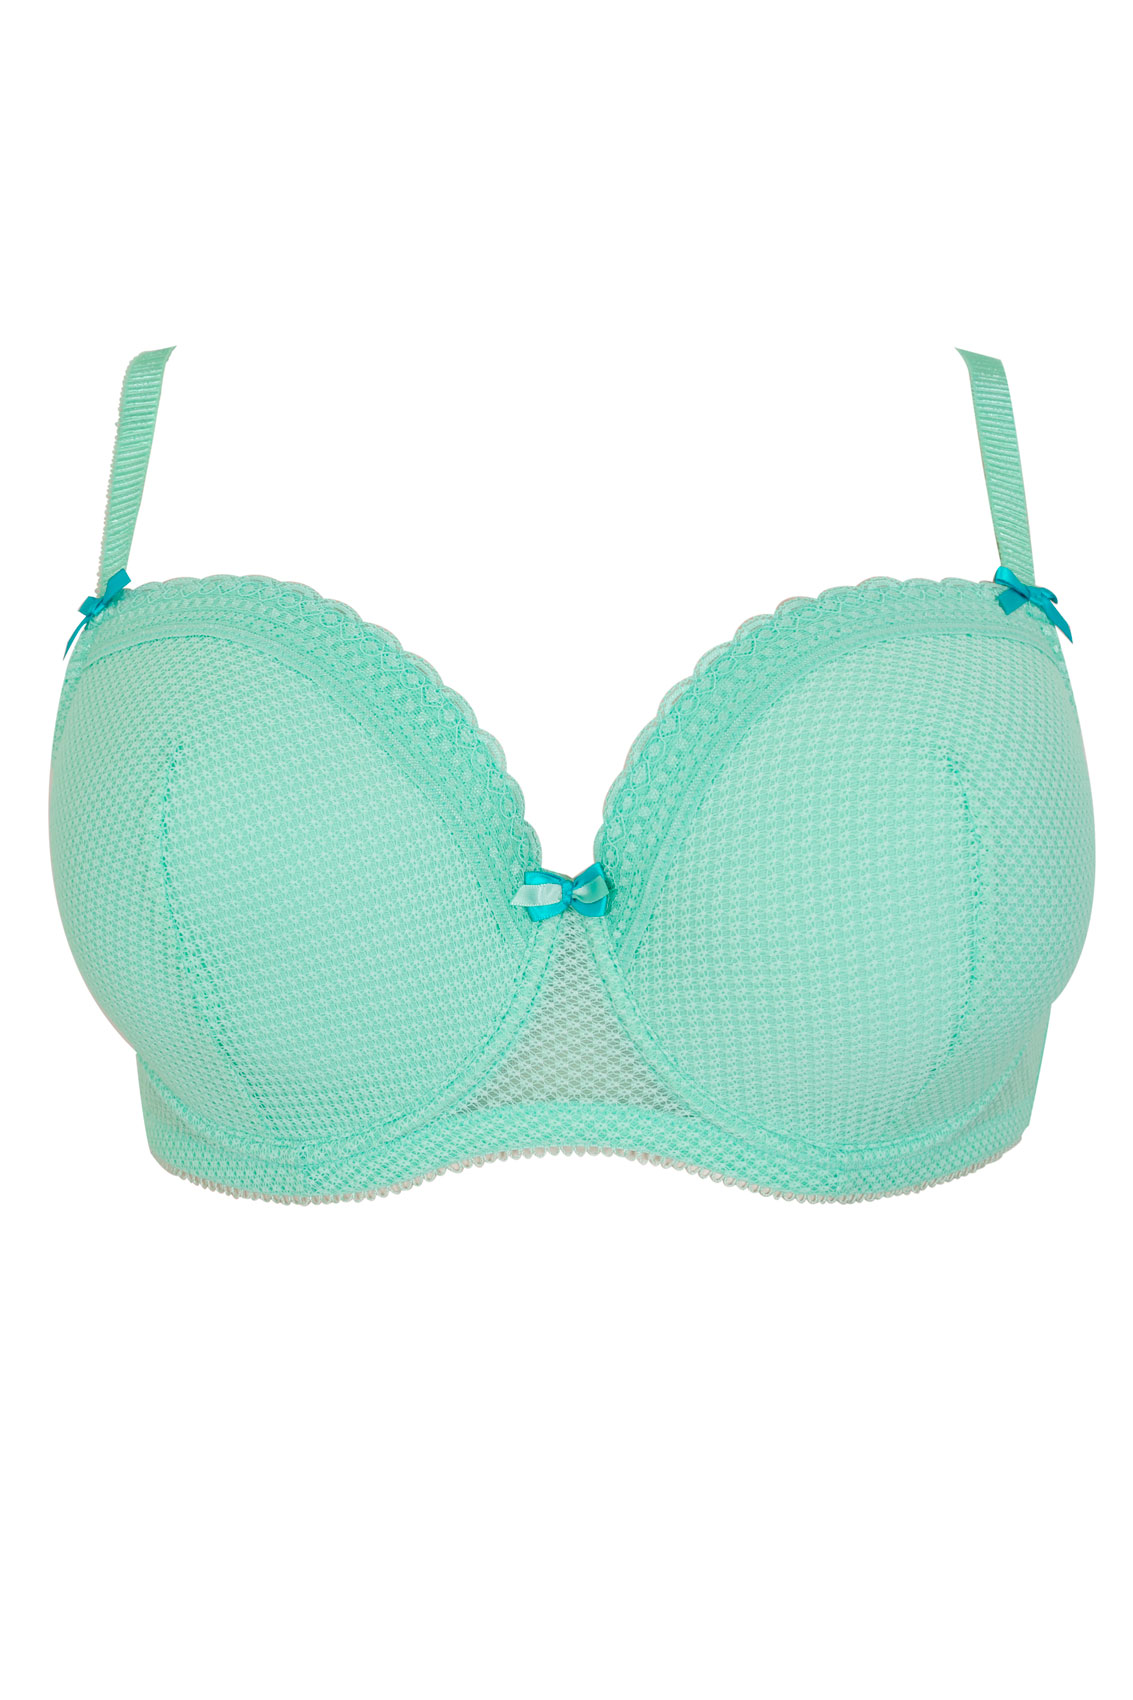 Mint Green Diamond Mesh And Lace Trim Underwired Bra Plus Size 38dd To 48g